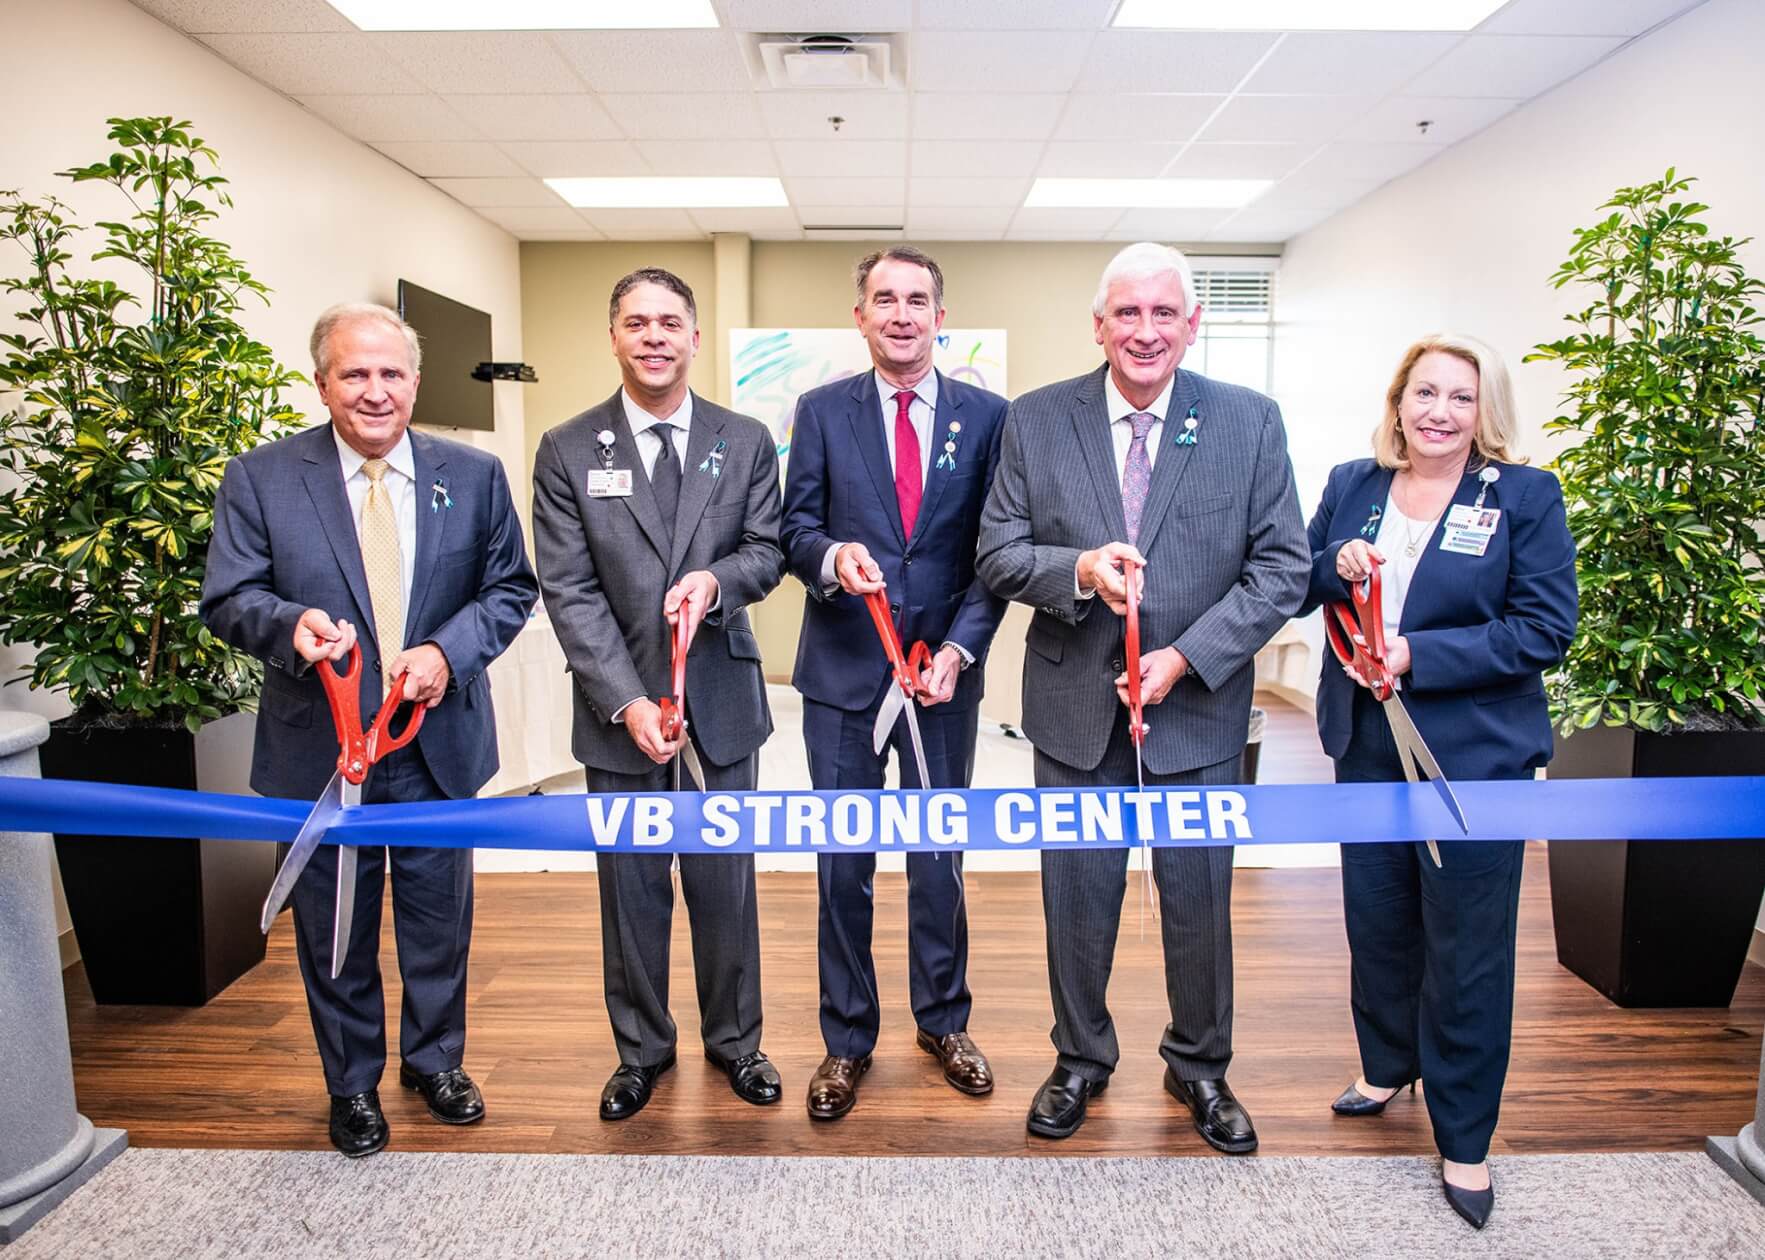 Opening ceremony of the VB Strong Center